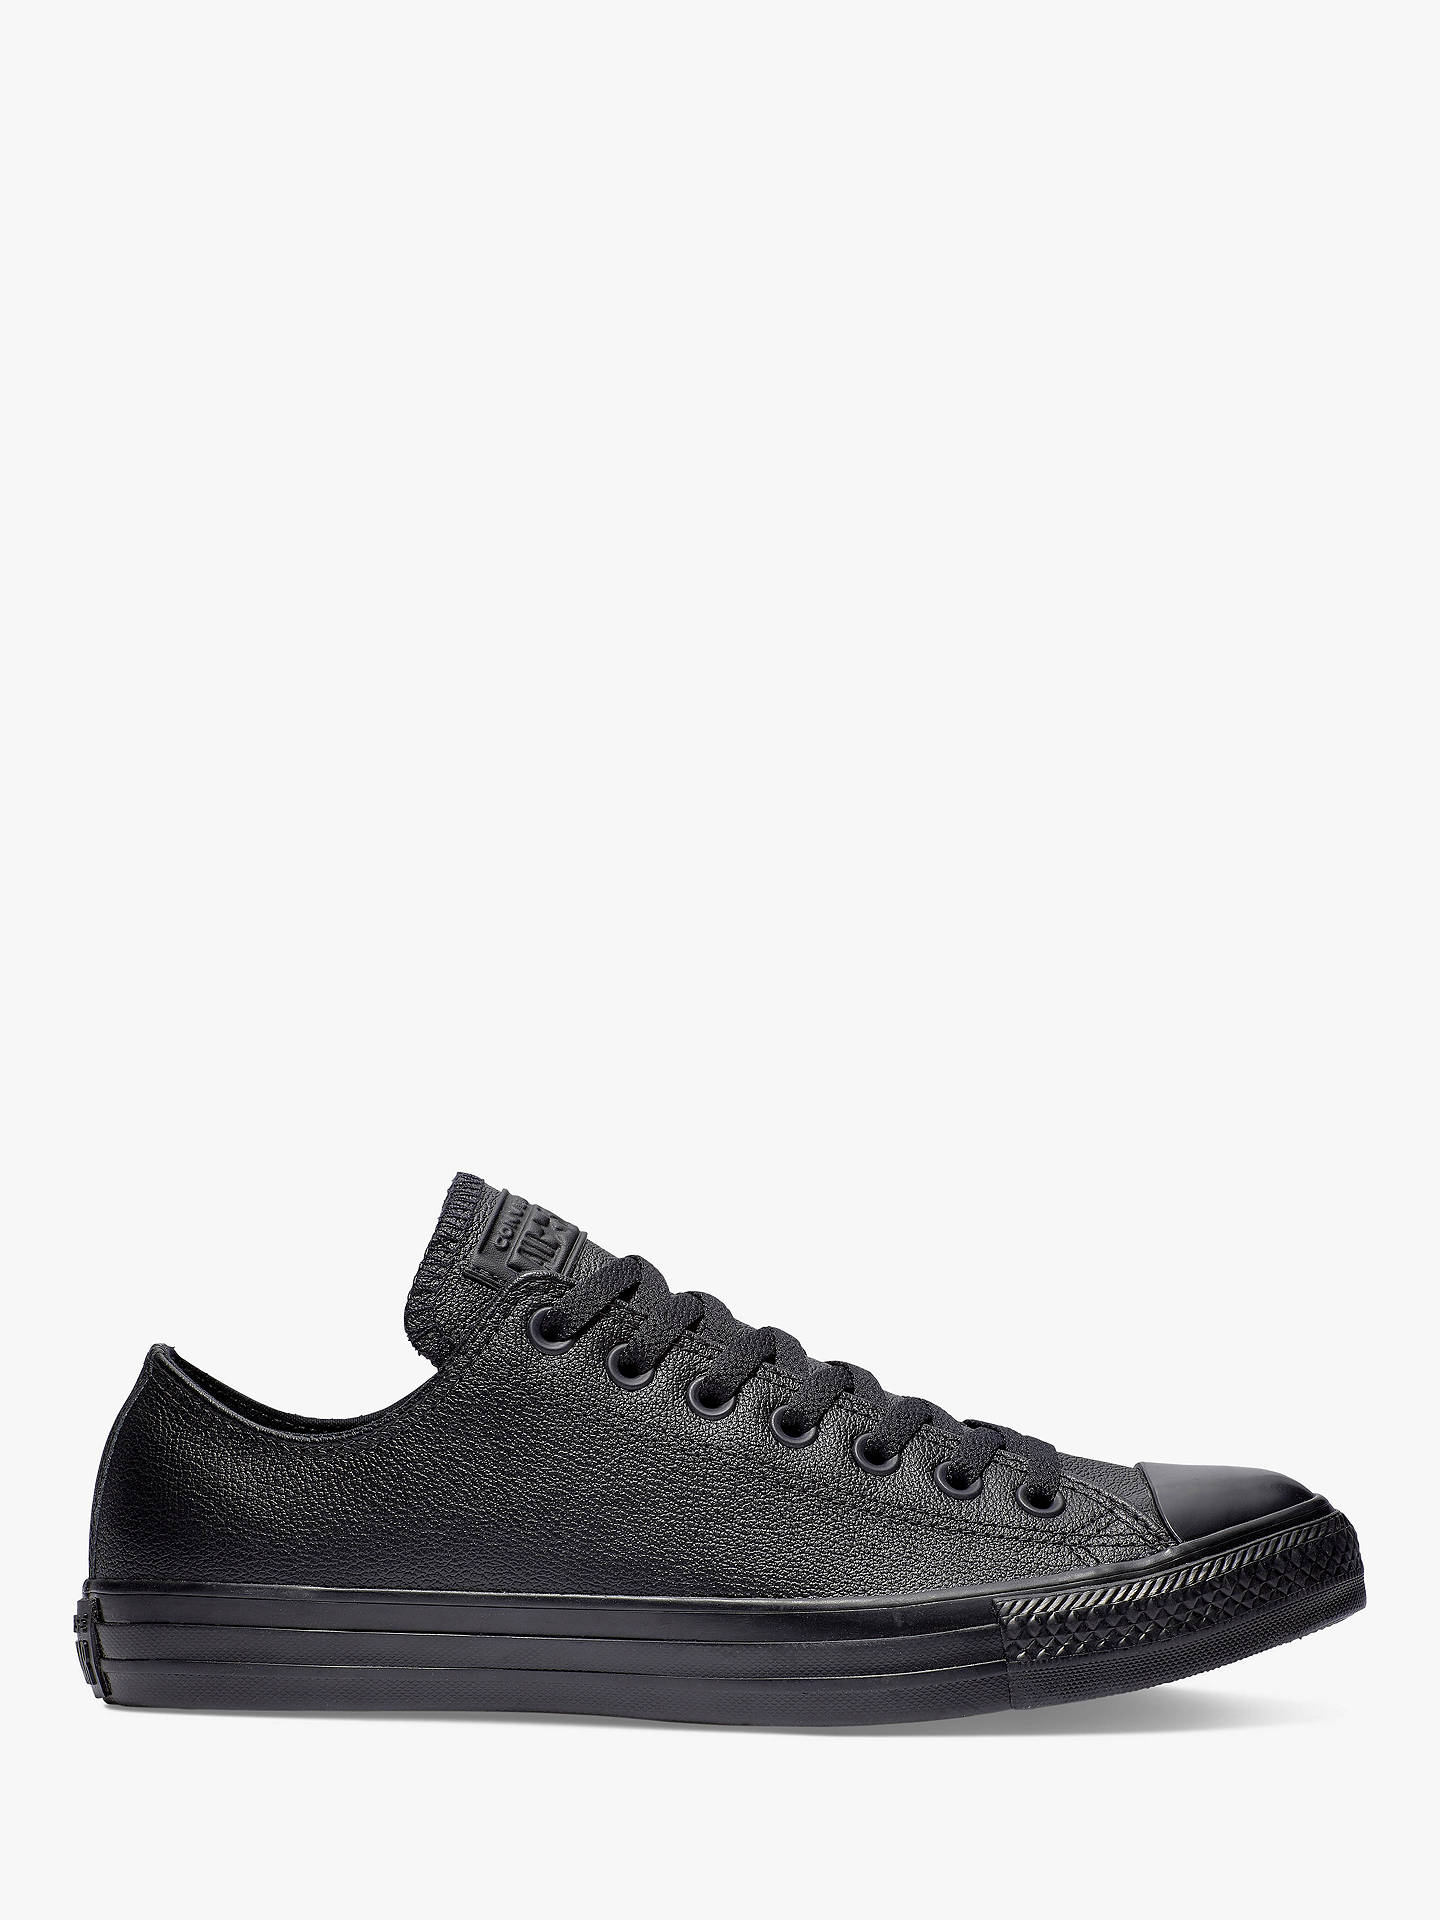 Converse Chuck Taylor All Star Ox Leather Trainers, Black Leather at ...